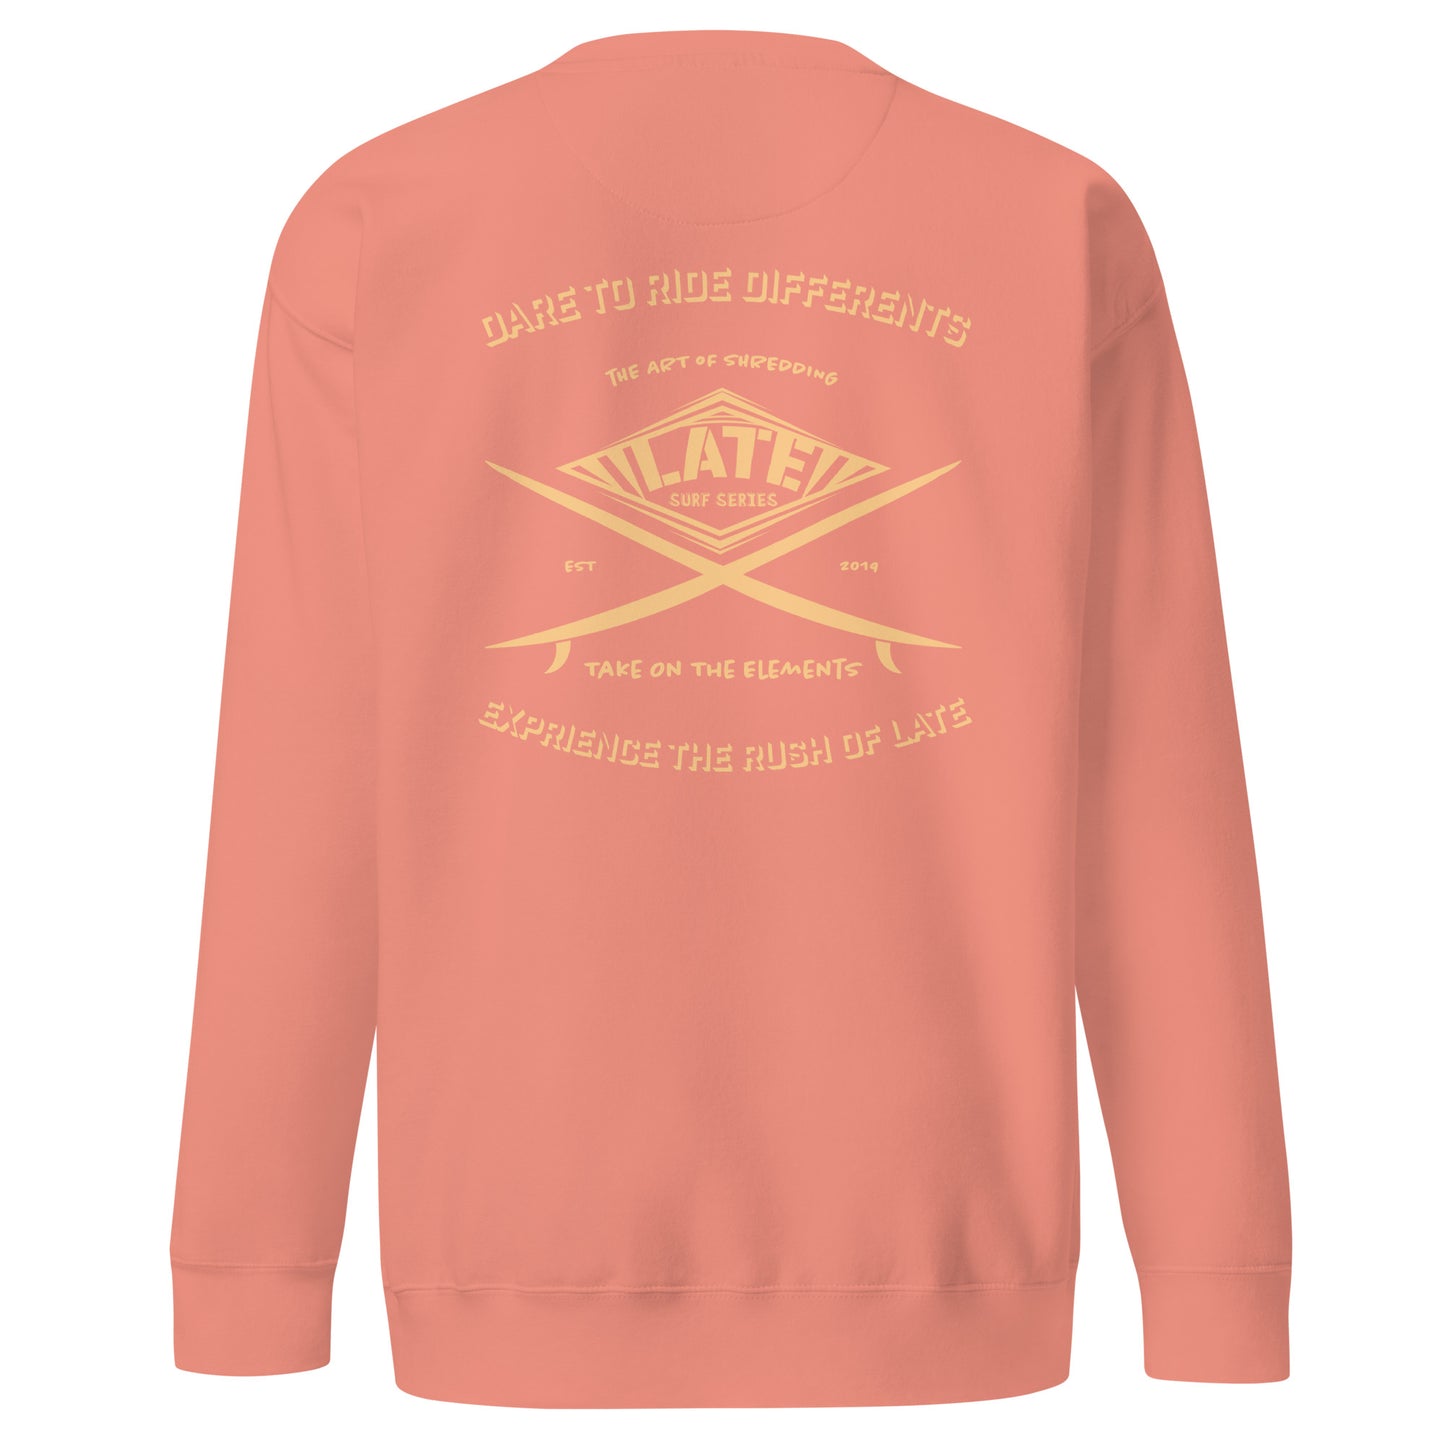 Sweatshirt surfboard dare to ride differents Take On The Elements experience the rush with Late de dos unisex couleur rose